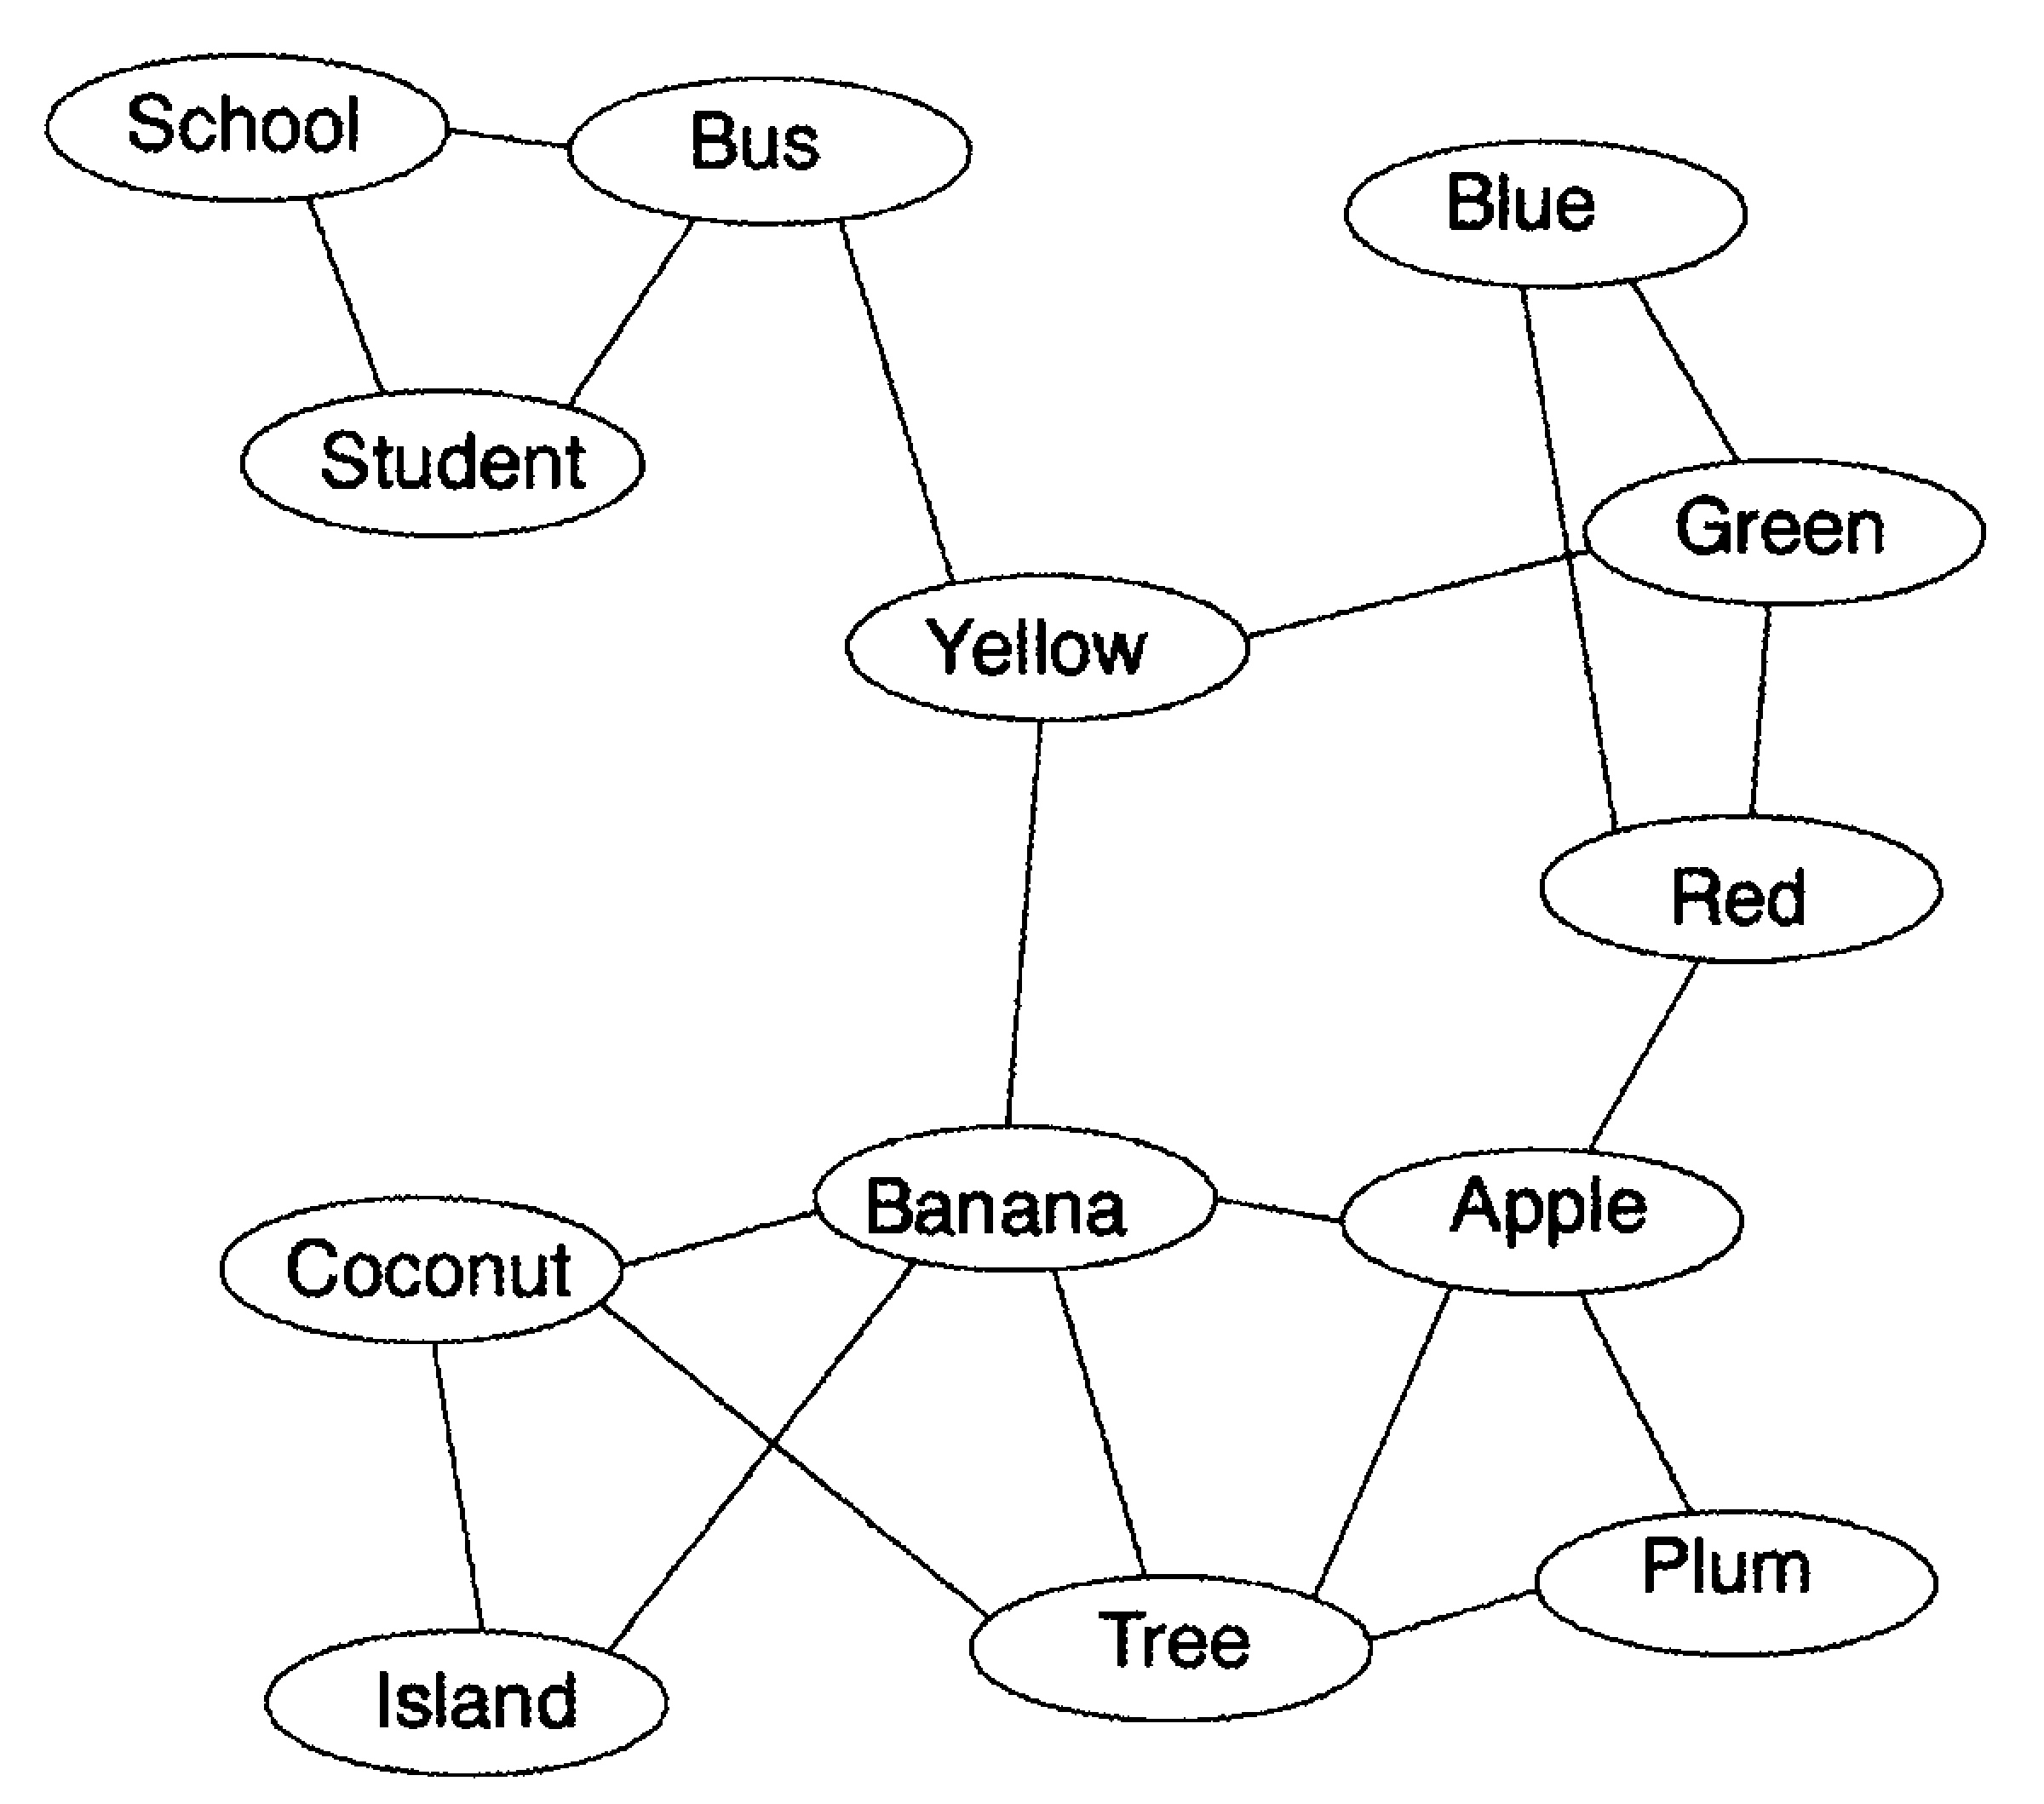 a network of related words